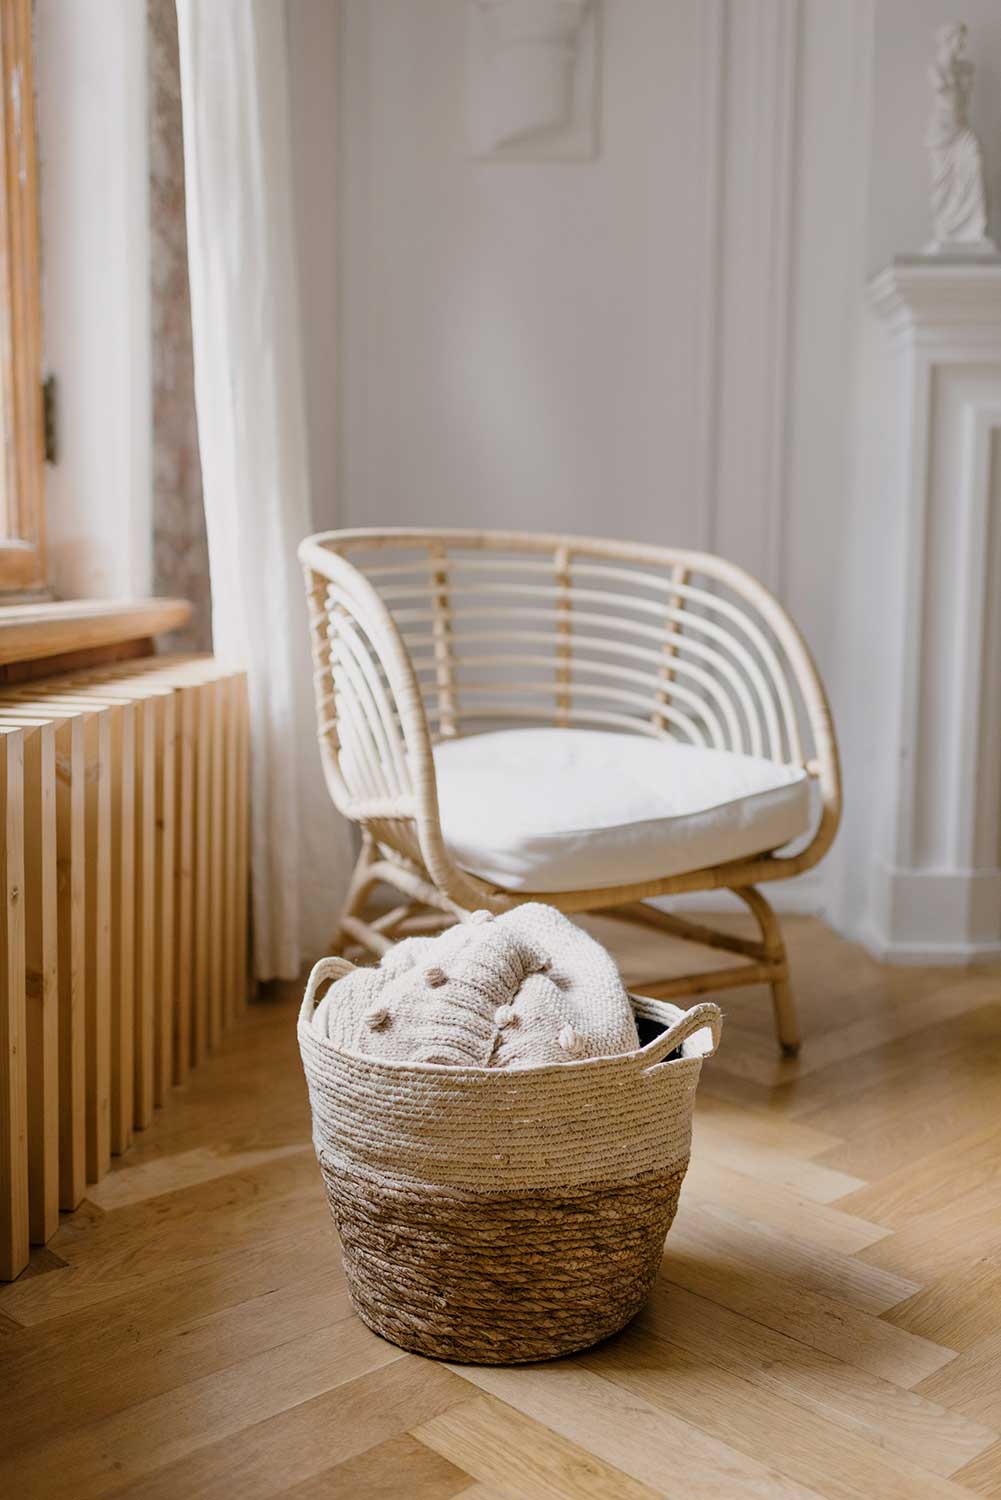 cream colored chair and basked with blankets